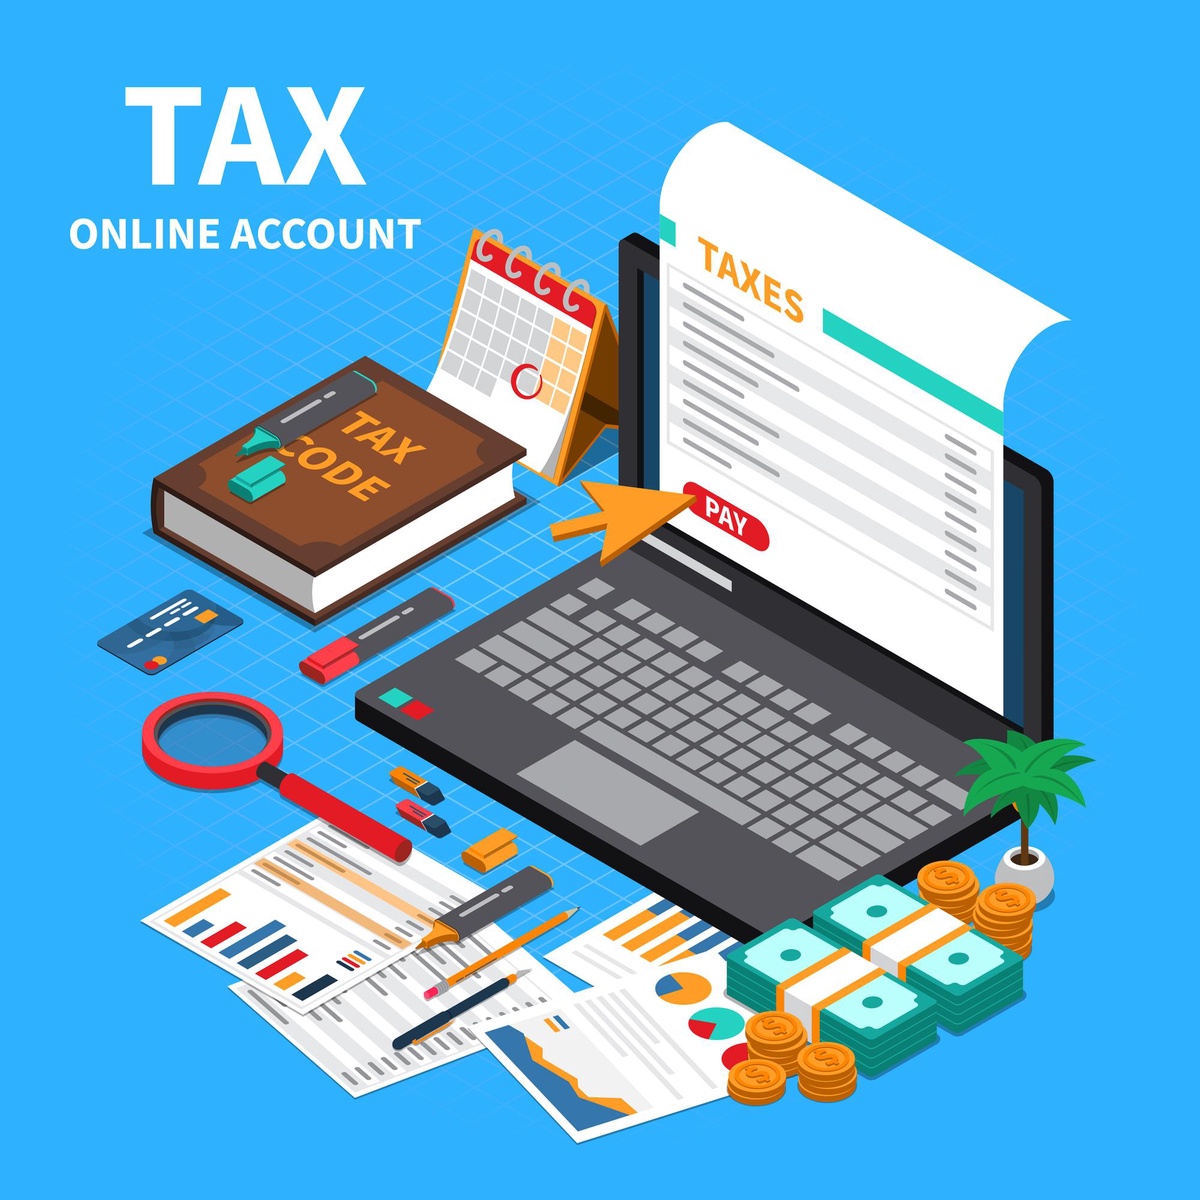 How to Register TAN on the Income Tax Portal